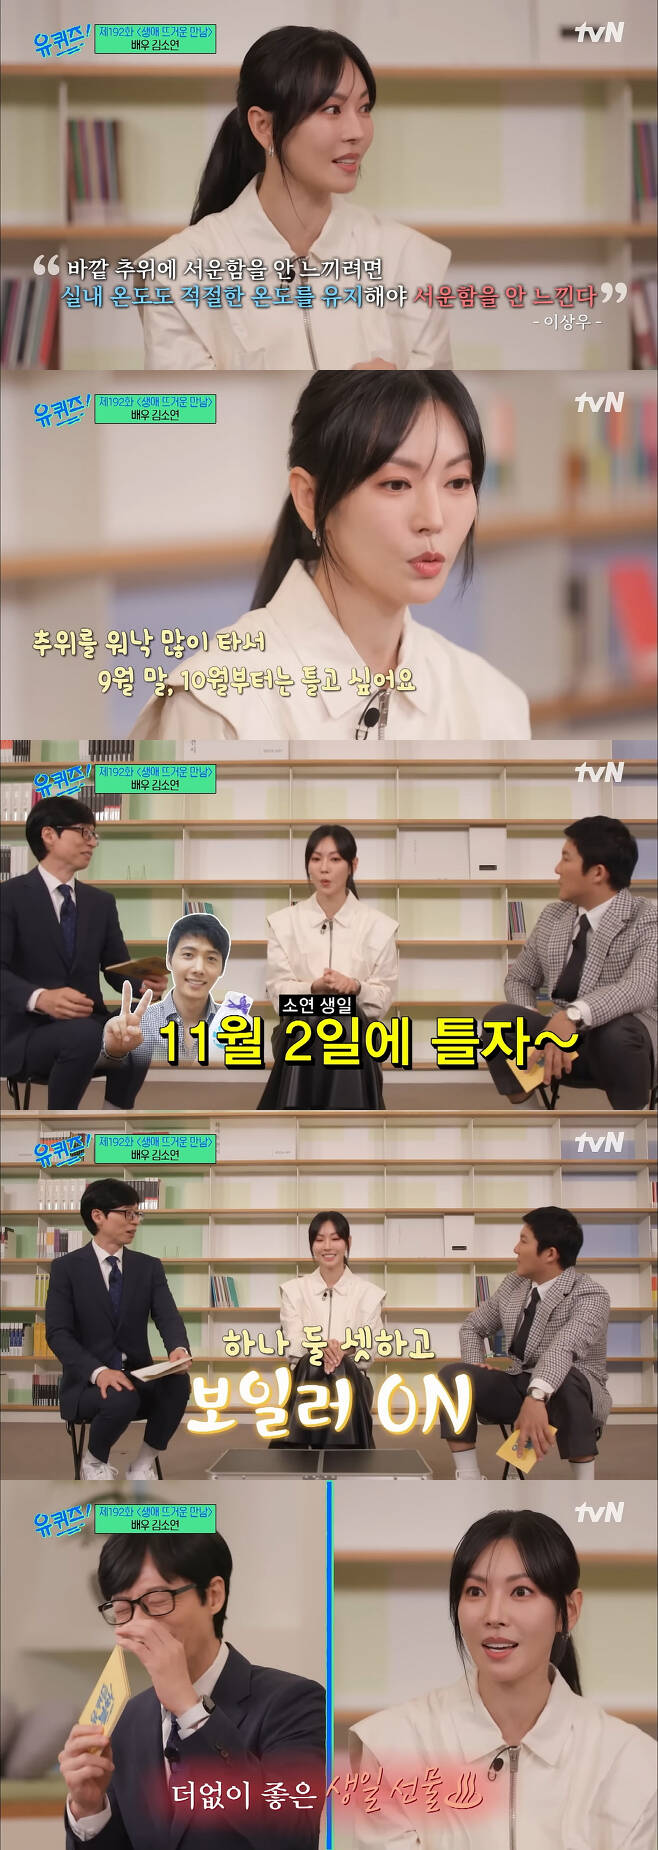 Its a world of professional uncomfortably.It is common to catch a pod if you say a word on the air. It has become an era when you laugh and criticize a private story.Actor Kim So-yeon appeared on tvNs You Quiz on the Block (also known as You Quiz on the Block), which aired on Thursday to promote the tvN drama Kumiho  ⁇  1938.Kim So-yeon revealed her Boiler episode with her husband Lee Sang-woo.Kim So-yeon said, Lee Sang-woo has a belief that the room temperature should be appropriate to avoid feeling sad in the outside cold, adding, There has been a separate day when Boiler opens.I want to play from the end of September because I have a lot of cold weather, Lee Sang-woo said on November 2, Jasin Birthday.Kim So-yeon said, With Lee Sang-woo, I pressed the Boiler switch together as soon as I opened my eyes on Birthday. As I got older, I lost meaning on Birthday. I do not know how long I waited for Birthday.I had such a good point, he said.However, even with such a joke, prouncomfortably was unrelenting. Kim So-yeon started to go to the SNS to say that he would not play Boiler.In the end, Kim So-yeon said, Lee Sang-woo, who cares more about my health than anyone else, thinks about my health and raises my immunity with proper exercise rather than too early heating. (I said) It seems to be healthy because of it, in fact, my husband does not like to be hot.I am sorry that I am having a hot autumn and winter every year because of me. I was short of expression. I had a lot of fun on Birthday last year. Thank you for your concern. It was Kim So-yeons polite explanatory remark.Kim So-yeon is an adult who can turn on Boiler if Jasin is cold. Lee Sang-woo is a problem that can be solved by persuading the couple if they oppose it.If you talk about this problem openly in the entertainment program, it means just an episode that you can laugh at in your daily life.However, there has been an era in which the remarks in these arts should be clarified with all kinds of courtesy.It is called the Chimsobongdae ( ⁇ ).Recently, small things like needles are exaggerated like sticks to make a big fuss. When one person speaks, he rushes around, grabs the pods, and even reveals his past activities.It is common to capture the expression on the broadcast and sell one person.It is the viewers who lose money. If these things become more frequent, the production team will have to censor Magnetism severely. In this situation, only safe and secure broadcasting, rather than autonomy, gets on the air.Of course, good is necessary, but excessive sanctions are never good for viewers.Nowadays, we have to coordinate every single comment in entertainment programs in advance, because its hard for us to predict where the controversy will come from, said a source at an entertainment agency.